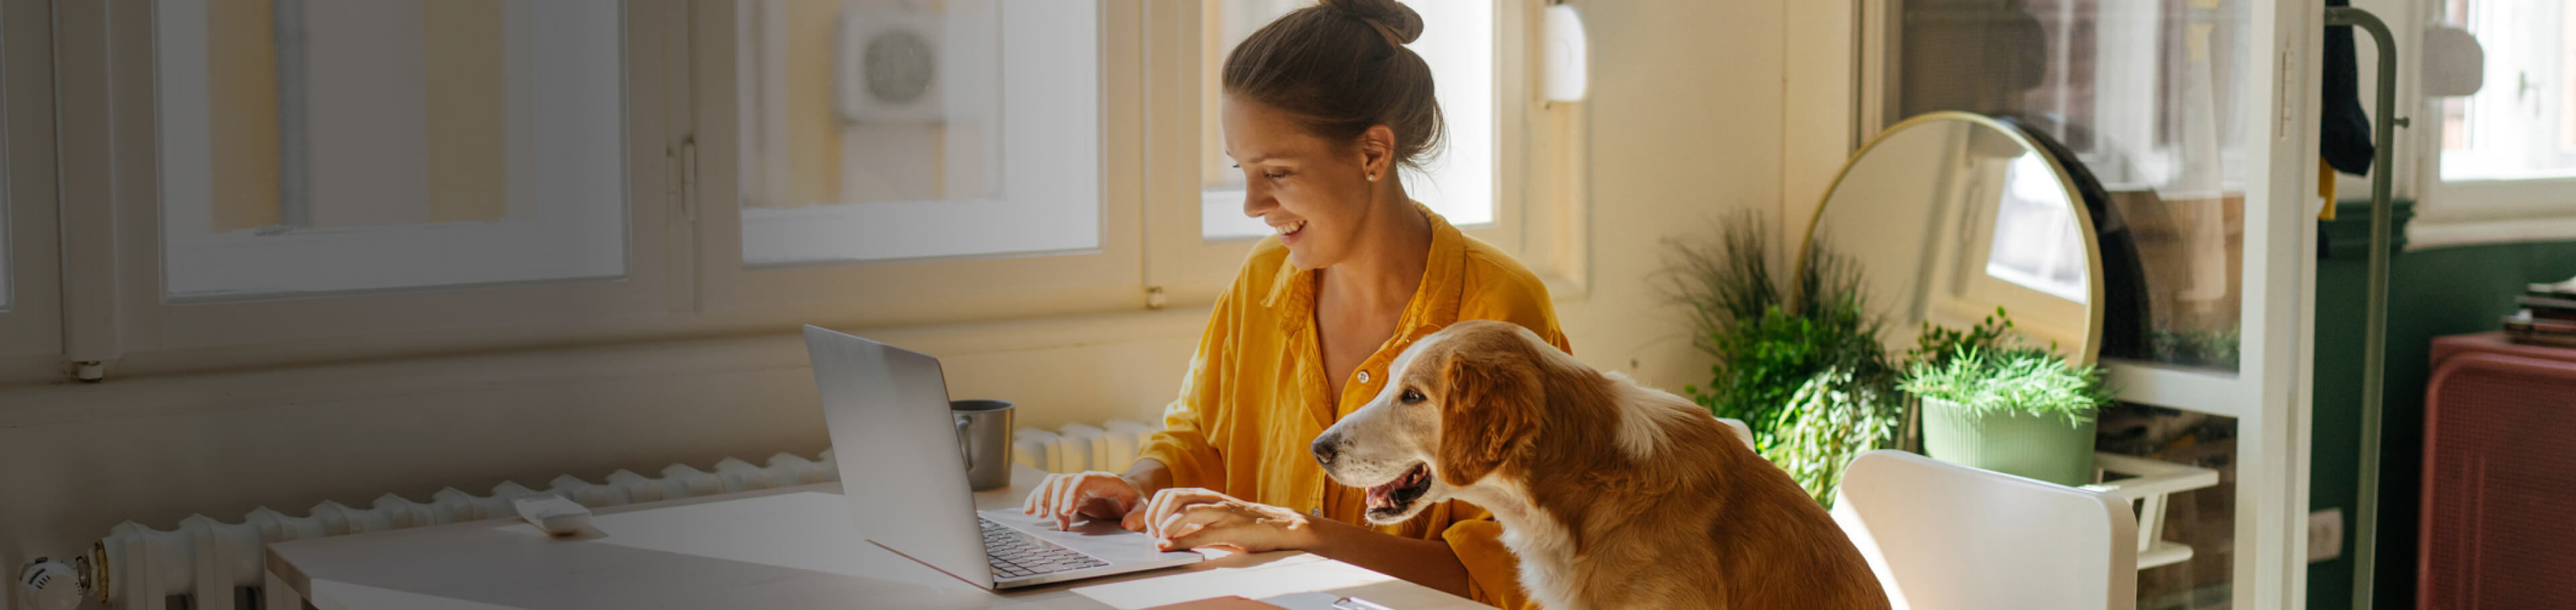 A woman working at a desk in a home office with her dog by her side